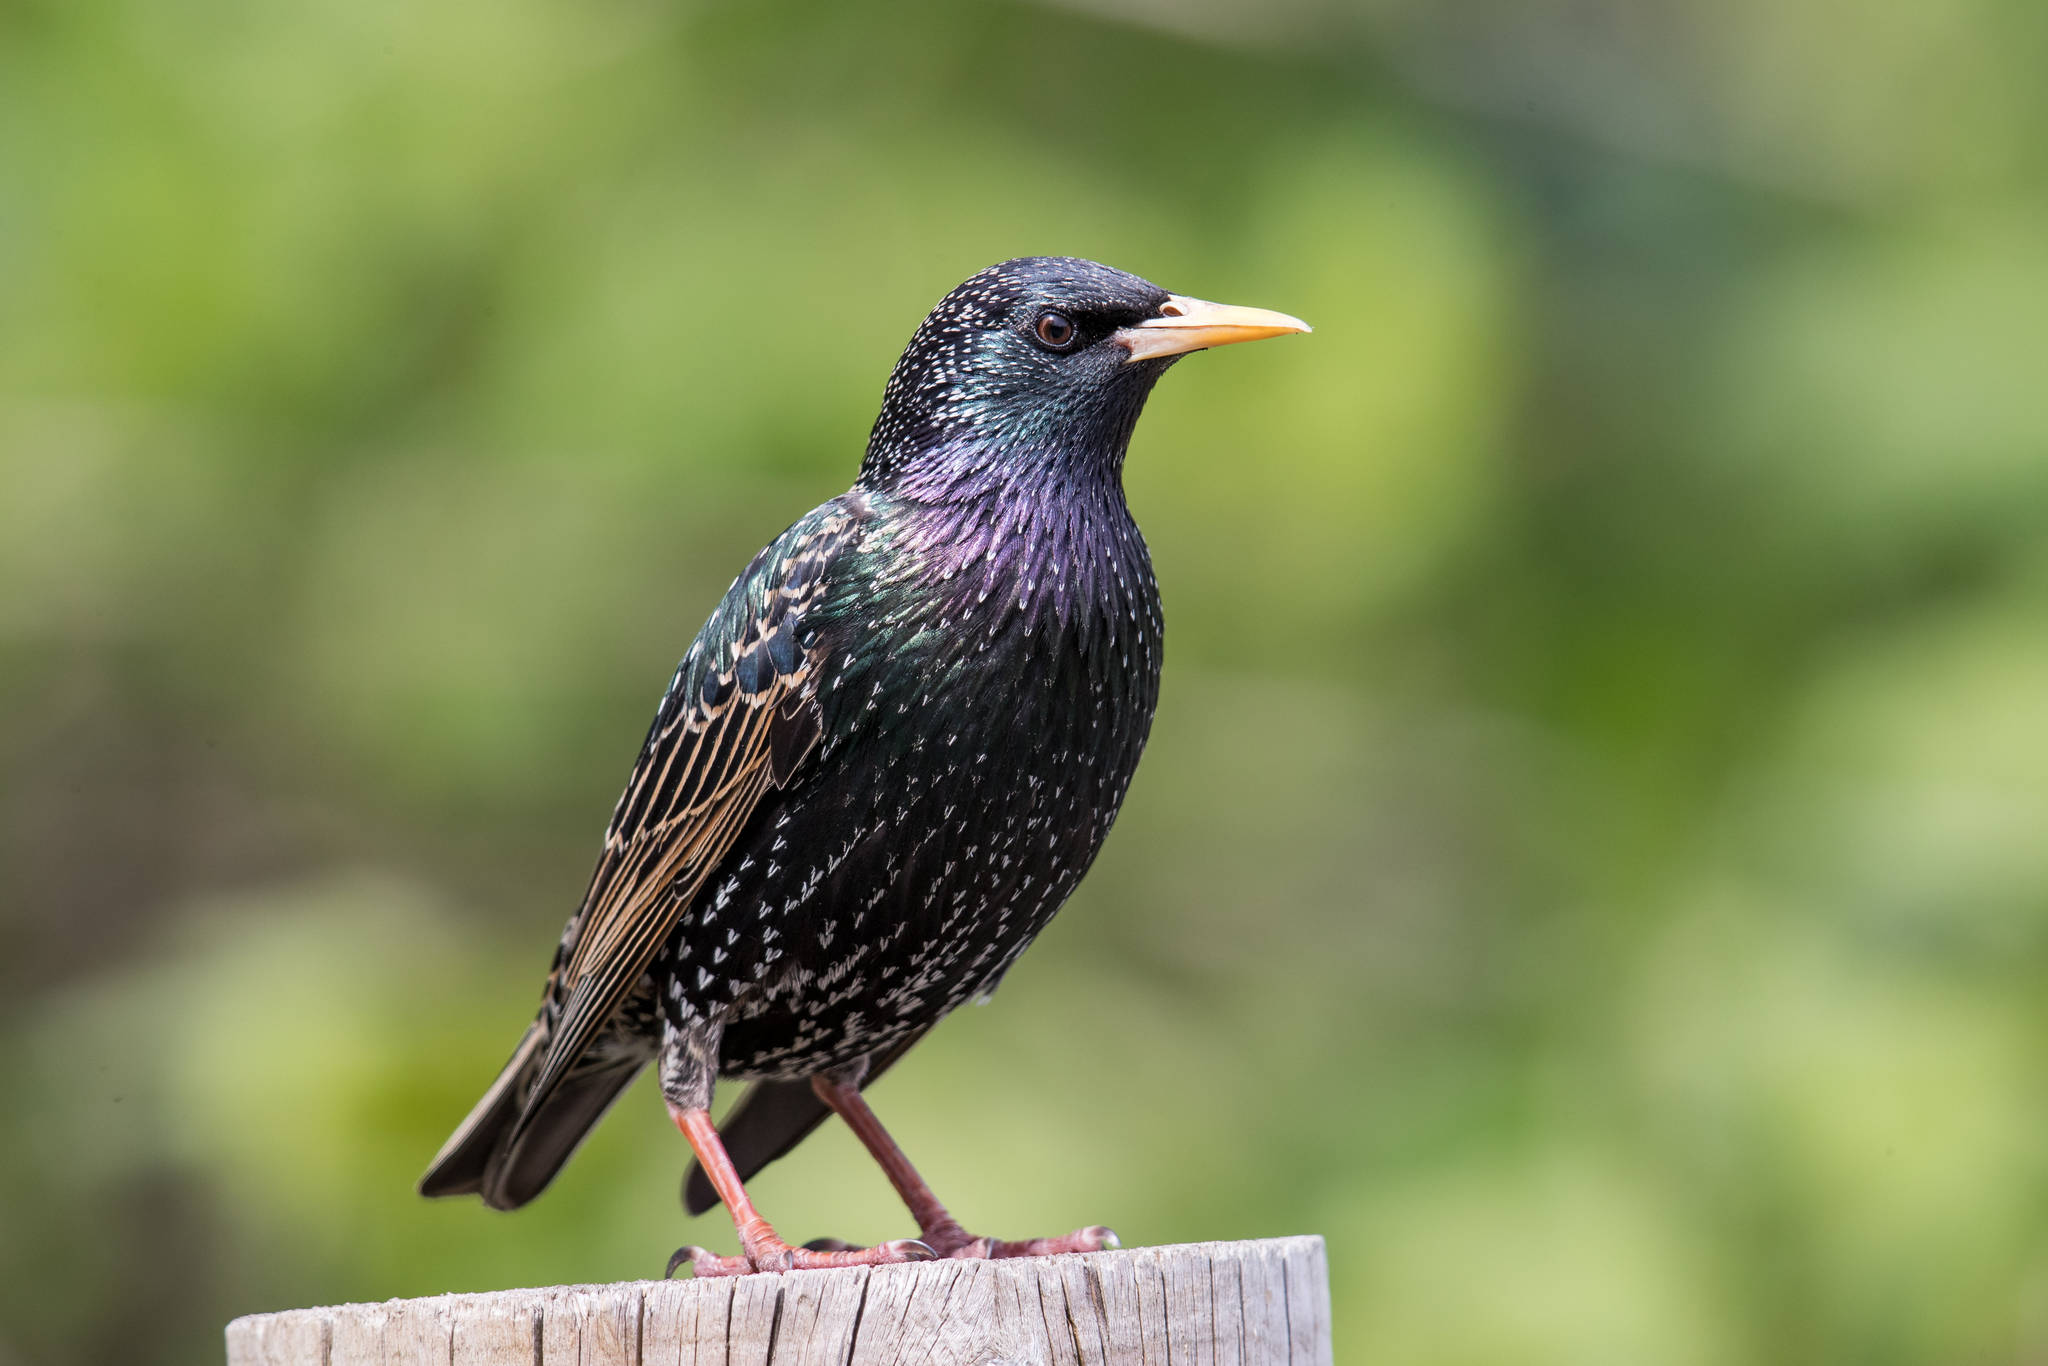 European starlings are among the birds that add fresh, green-leafy, nonstructural material to theirs nests. In general, the added greenery is from species that have aromatic leaves, rich in volatile compounds; these plants are a highly non-random, carefully selected portion of the plants available in the nesting habitat. (Mick Thompson / Flickr)